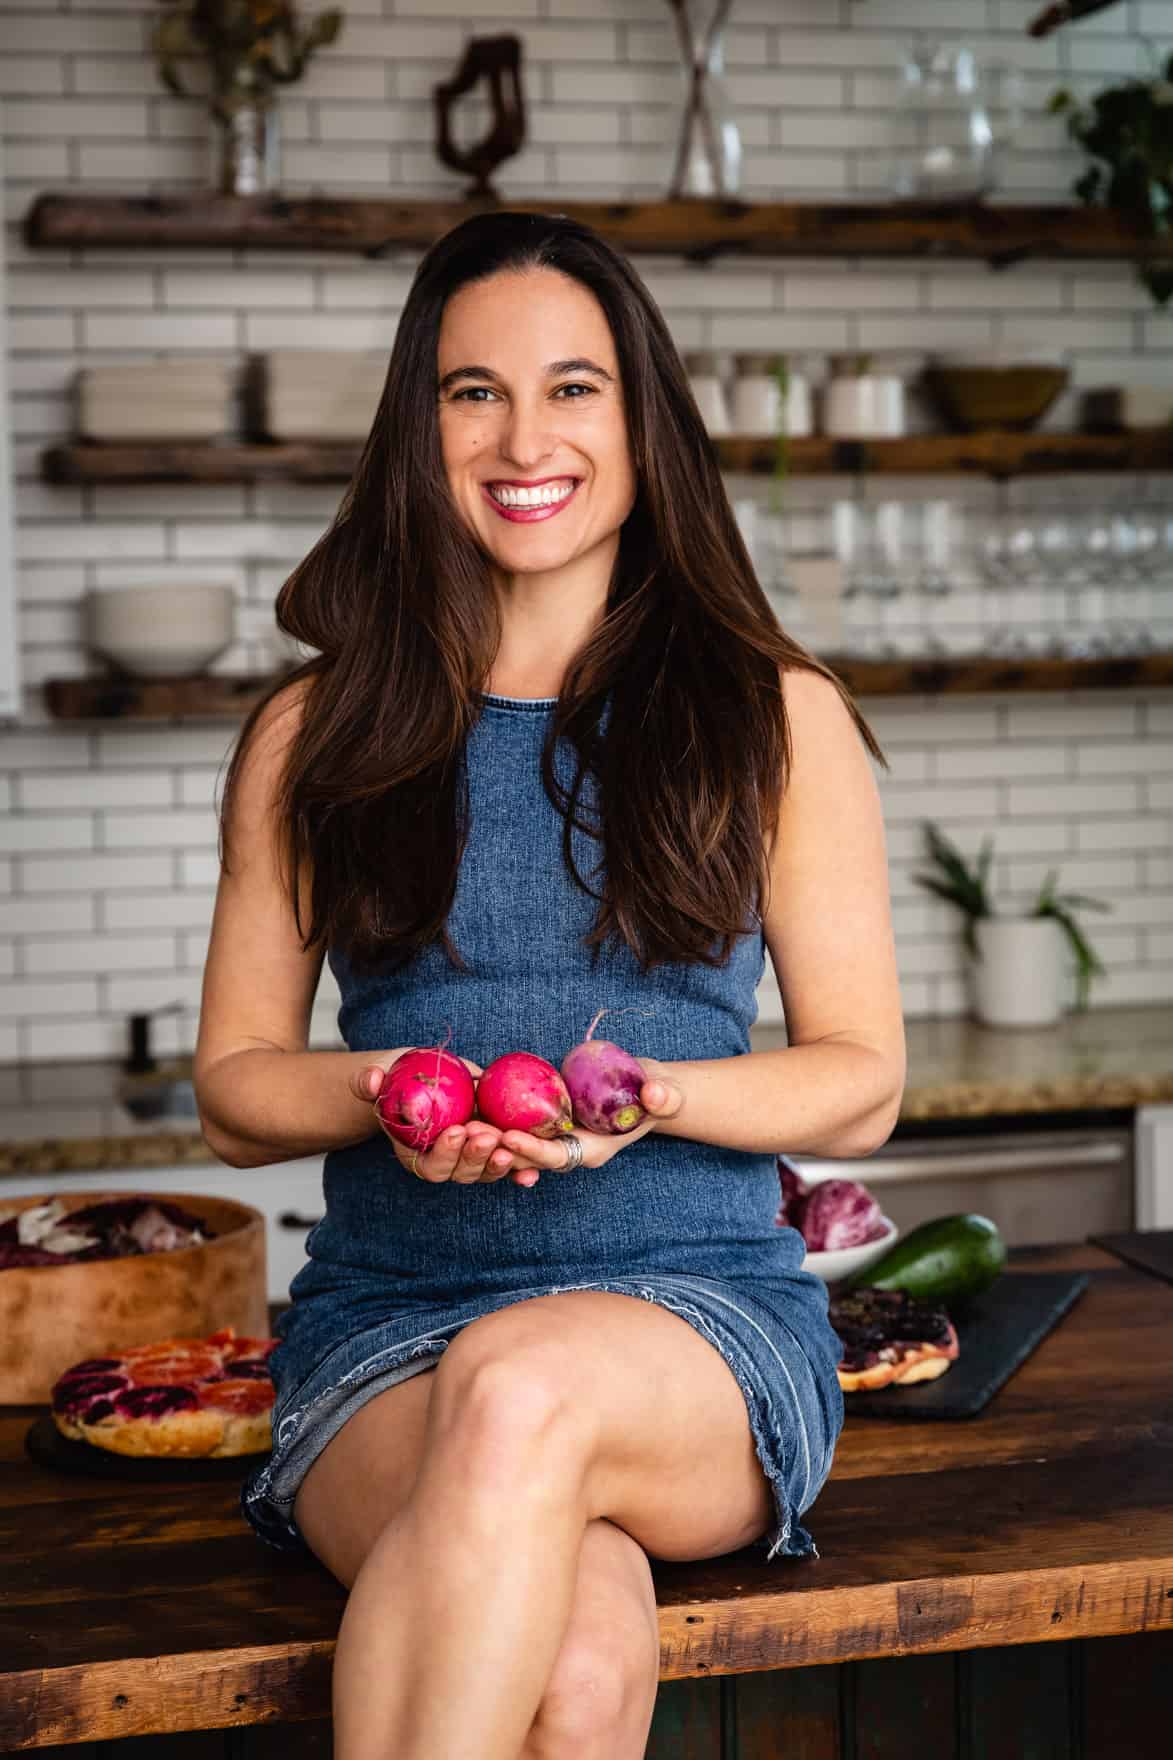 Chef Daniela Gerson in the kitchen holding root veggies.